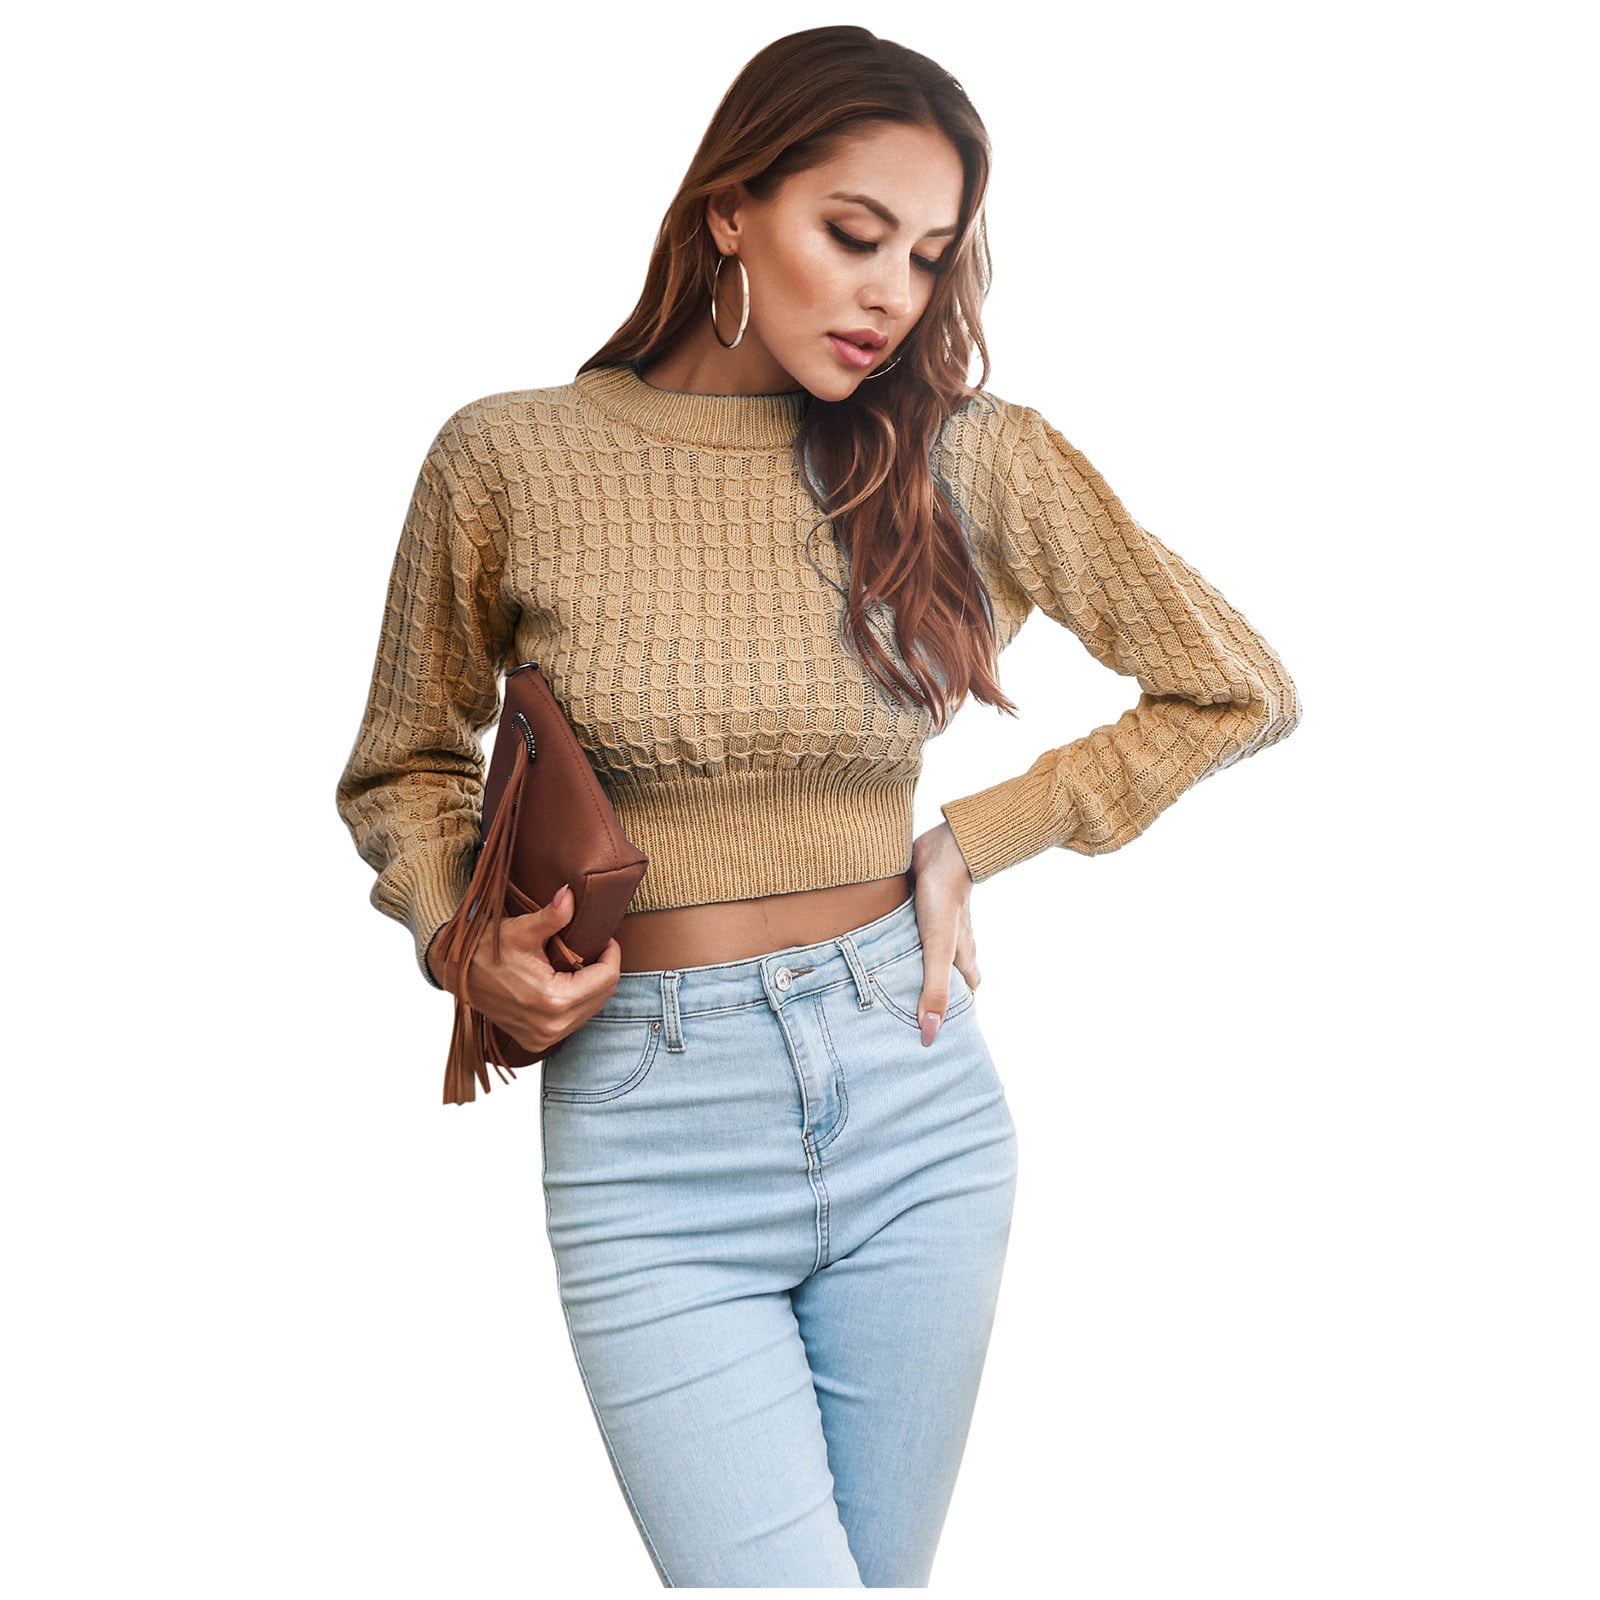 vbnergoie Womens Knit Long Sleeves Crop Sweater Loose Knitted Pullover  Winter Sweater Tops Cardigan with Button plus Size down Coat 